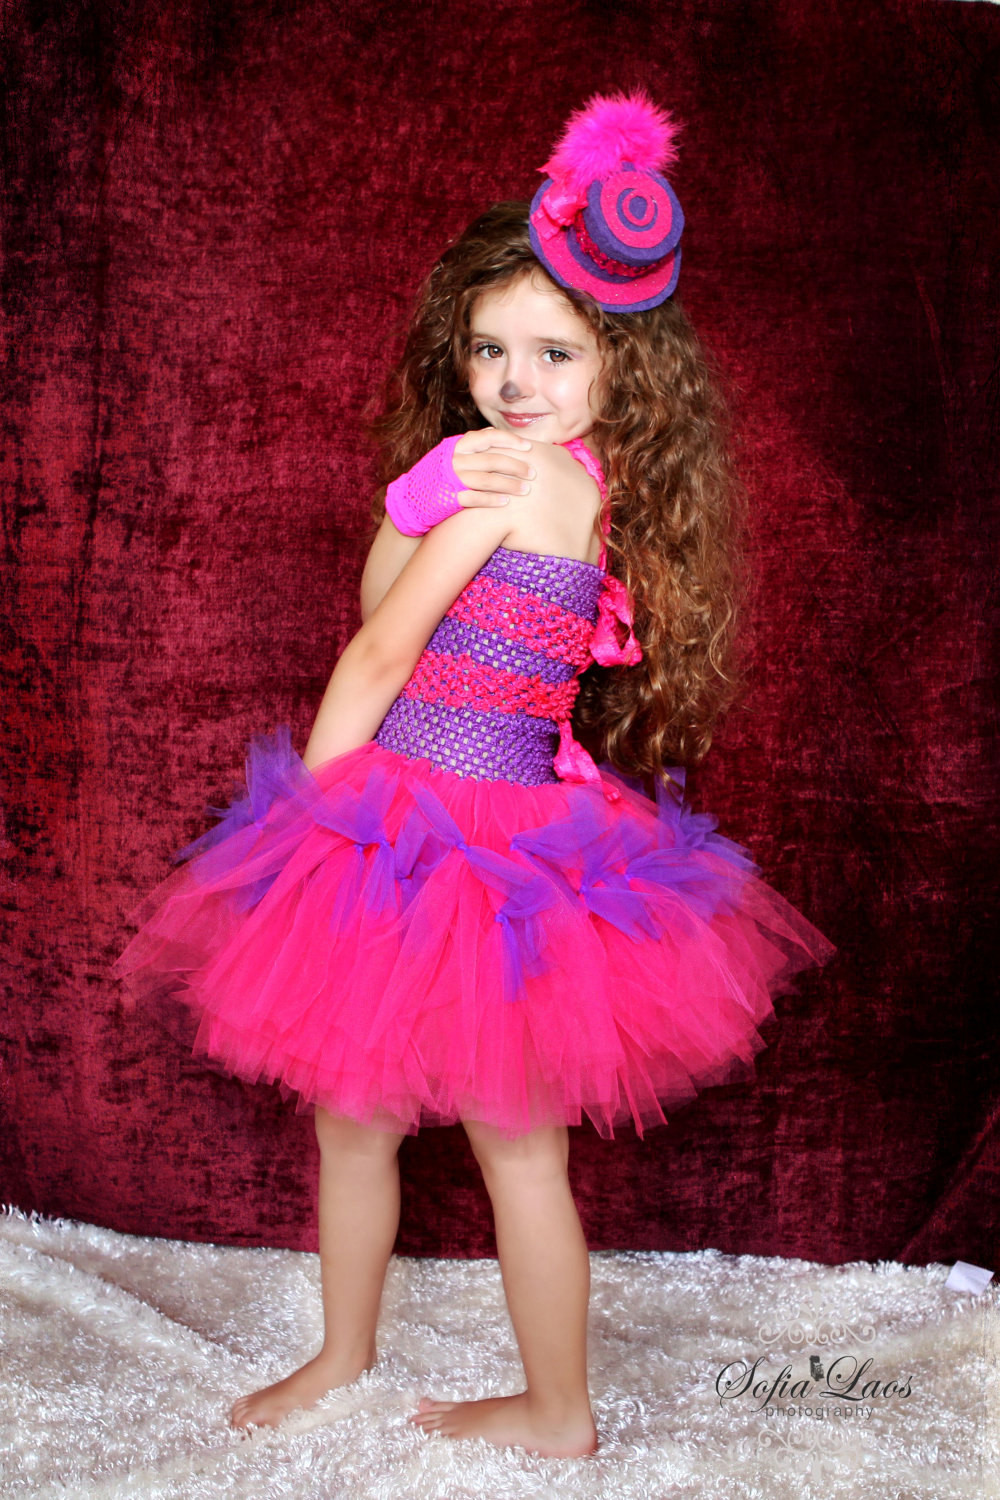 DIY Cheshire Cat Costume
 Cheshire cat inspired tutu outfit from Alice in wonderland